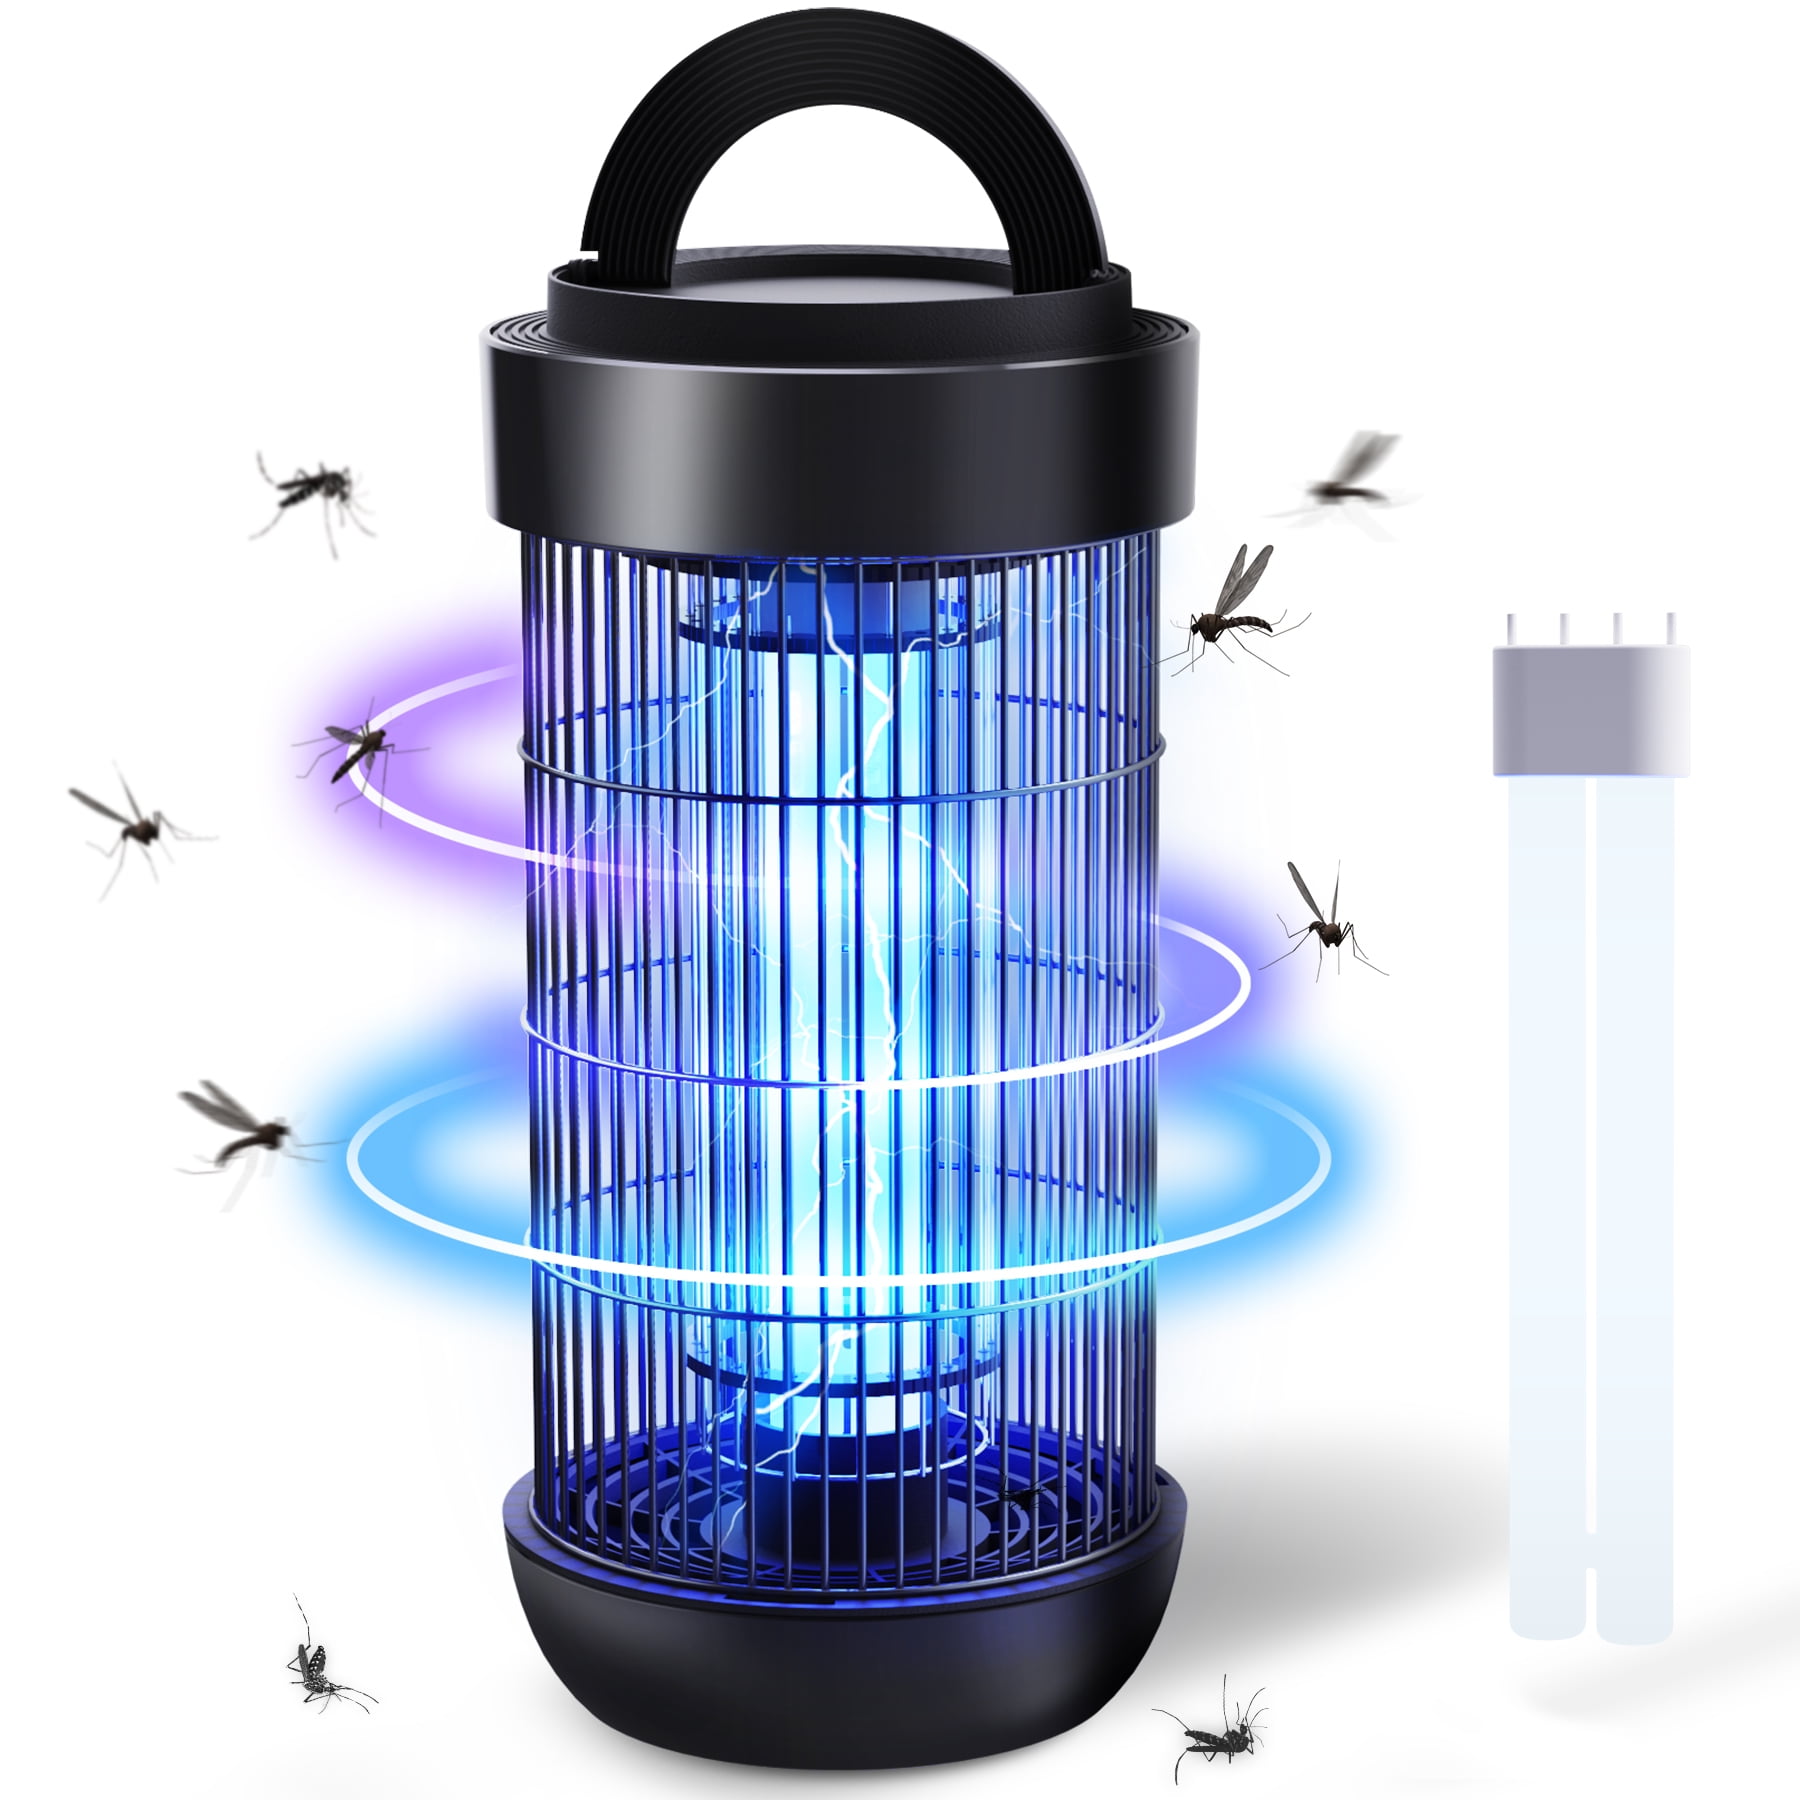 4000V Waterproof Fly Zapper for Patio,Electronic Mosquito Killer Lamp,UV Electric Insect Killer Trap Lamp for Garden Backyard and Home Indoor 1/2 Acre Coverage CHLANT Electric Bug Zapper Outdoor 